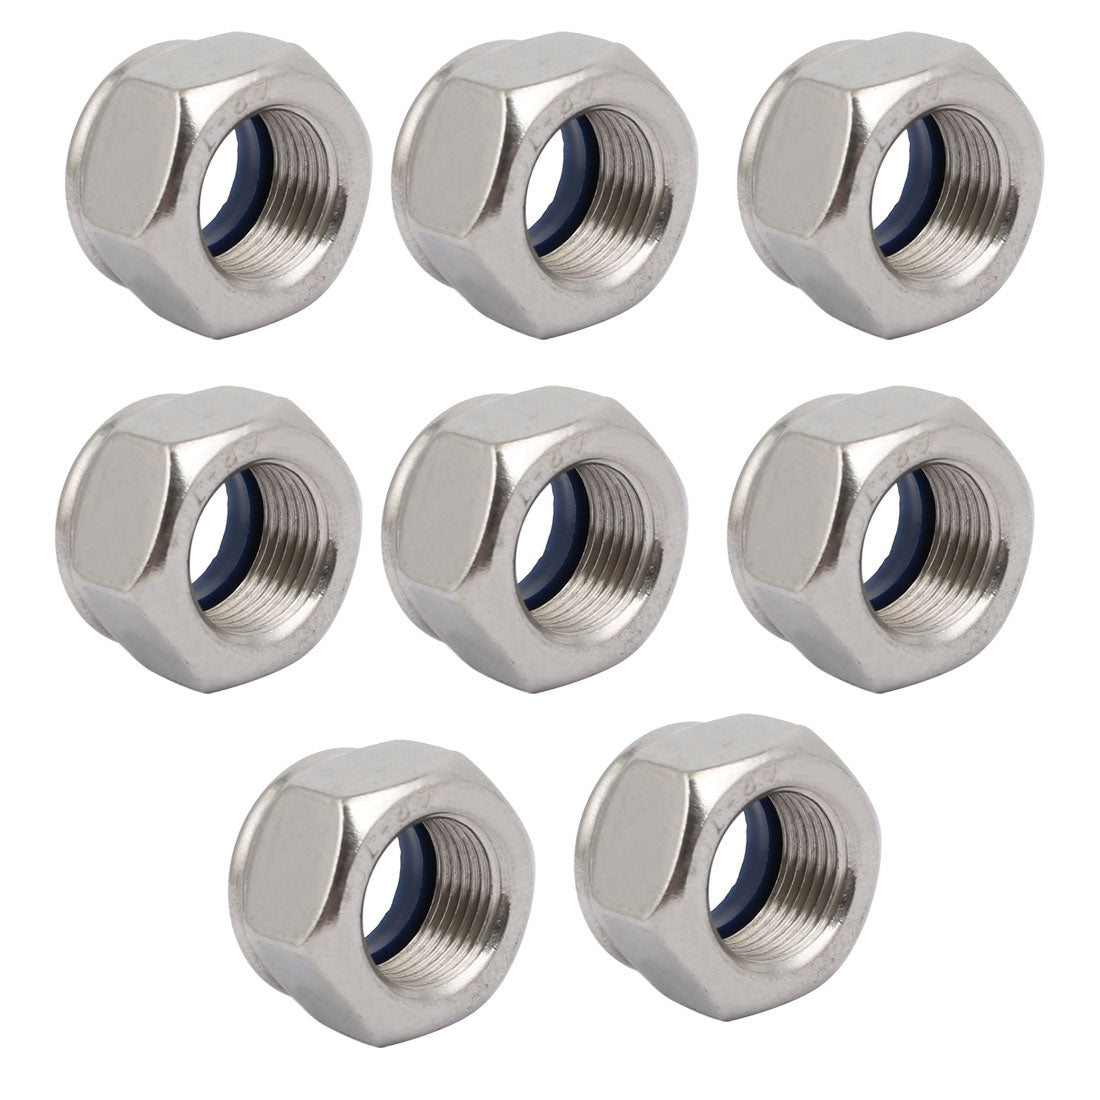 uxcell Uxcell 8pcs M18 x 1.5mm Pitch Metric Fine Thread 304 Stainless Steel Hex Lock Nuts